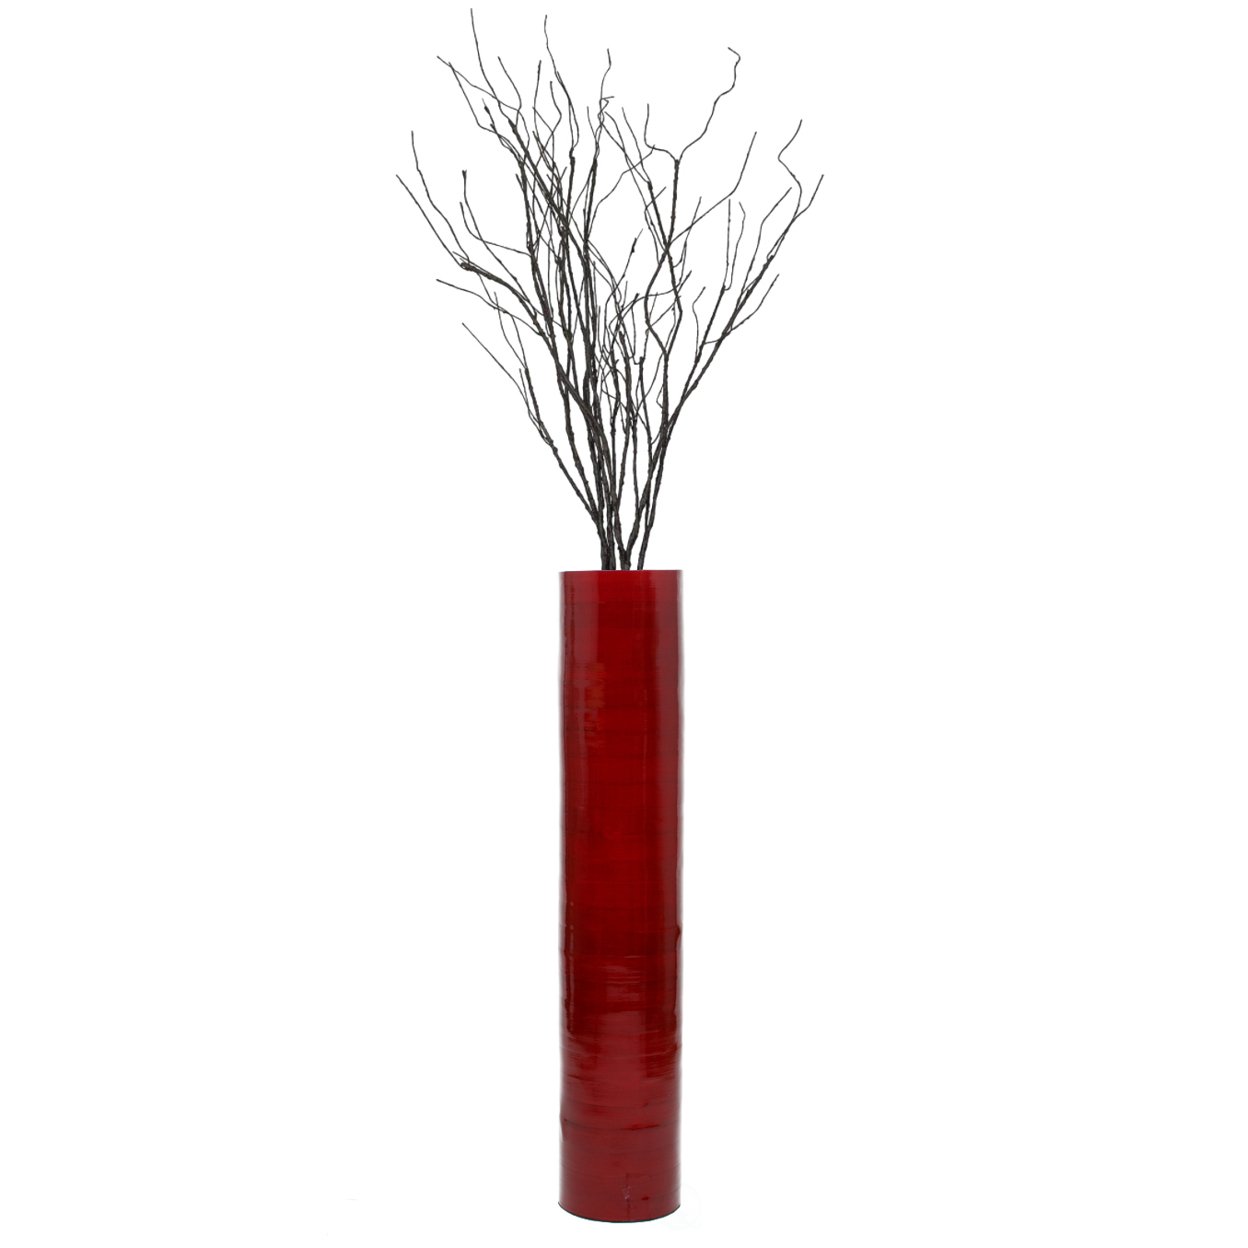 Tall Decorative Contemporary Bamboo Display Floor Vase Cylinder Shape, 30 Inch - Red